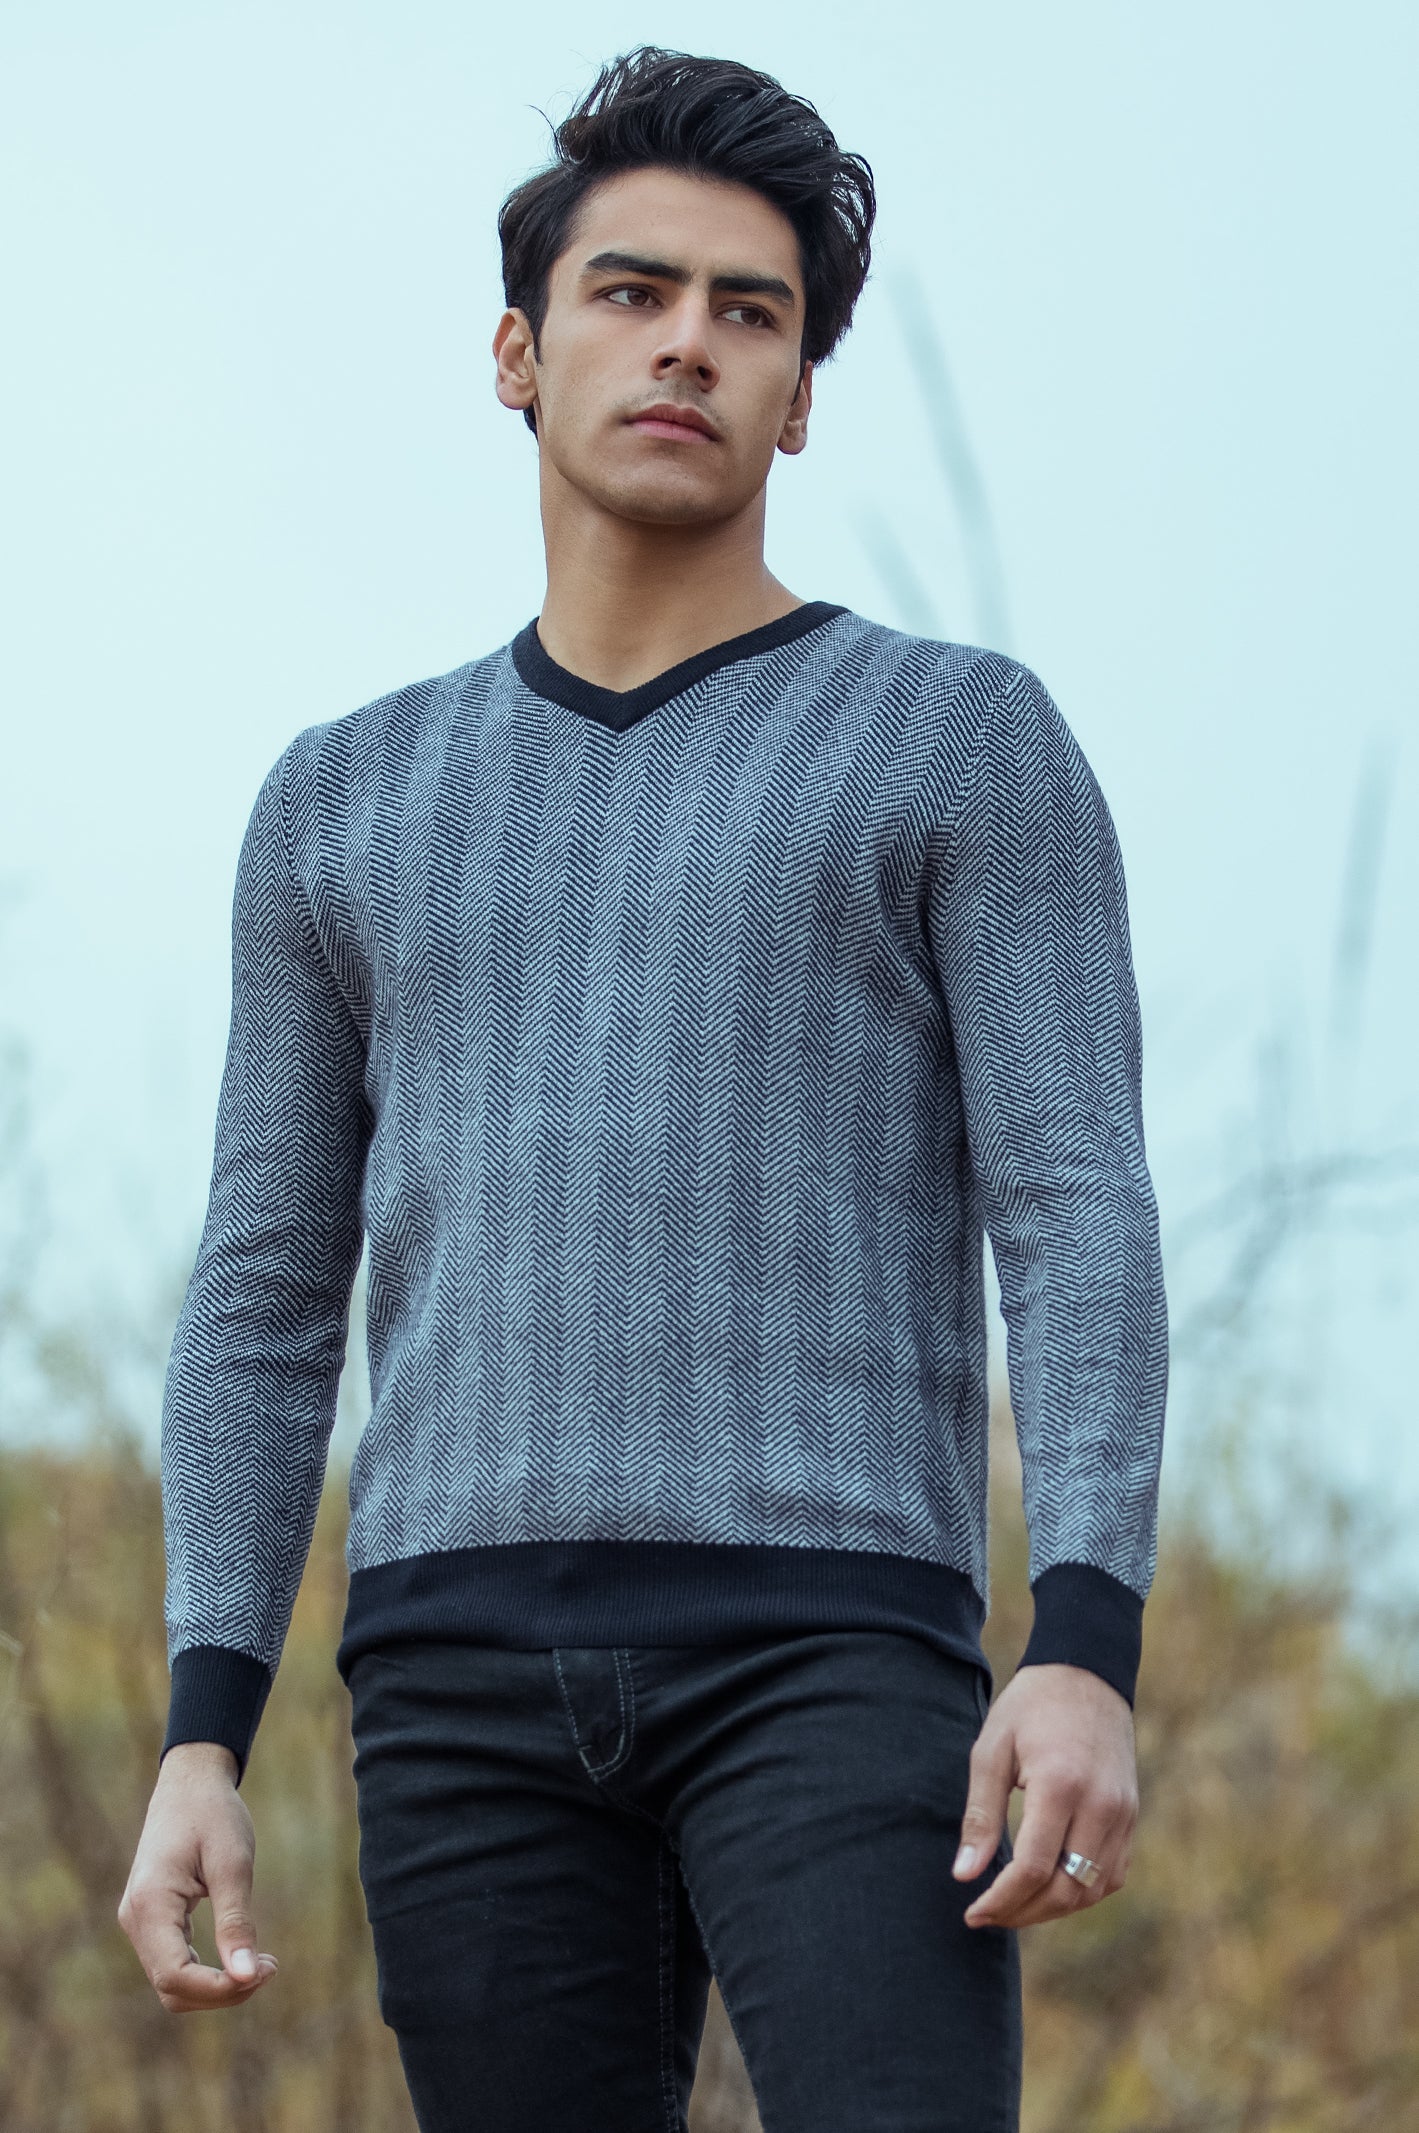 Gents Sweater In Grey SKU: SA565-GREY - Diners